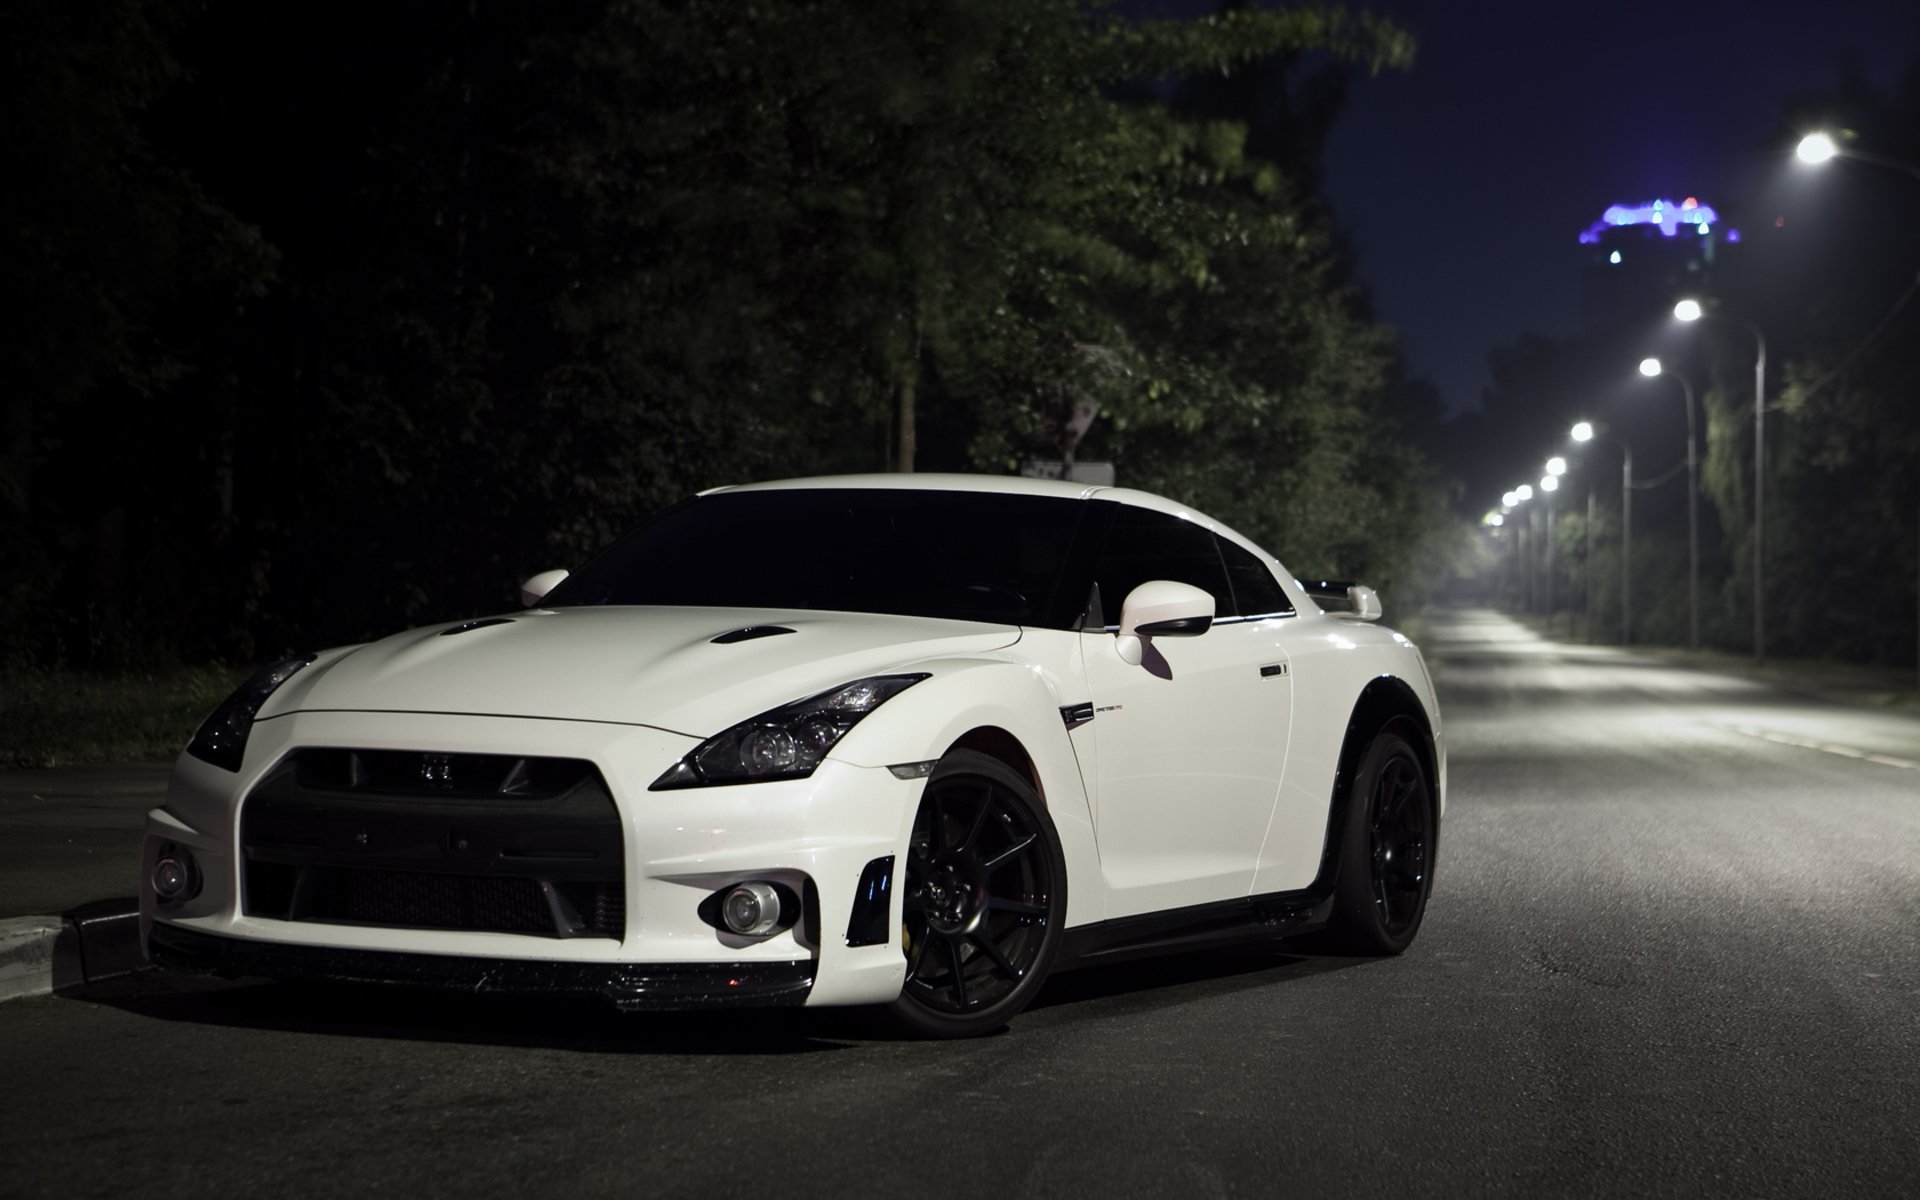 Free photo A white nissan gtr stands under the night lights.